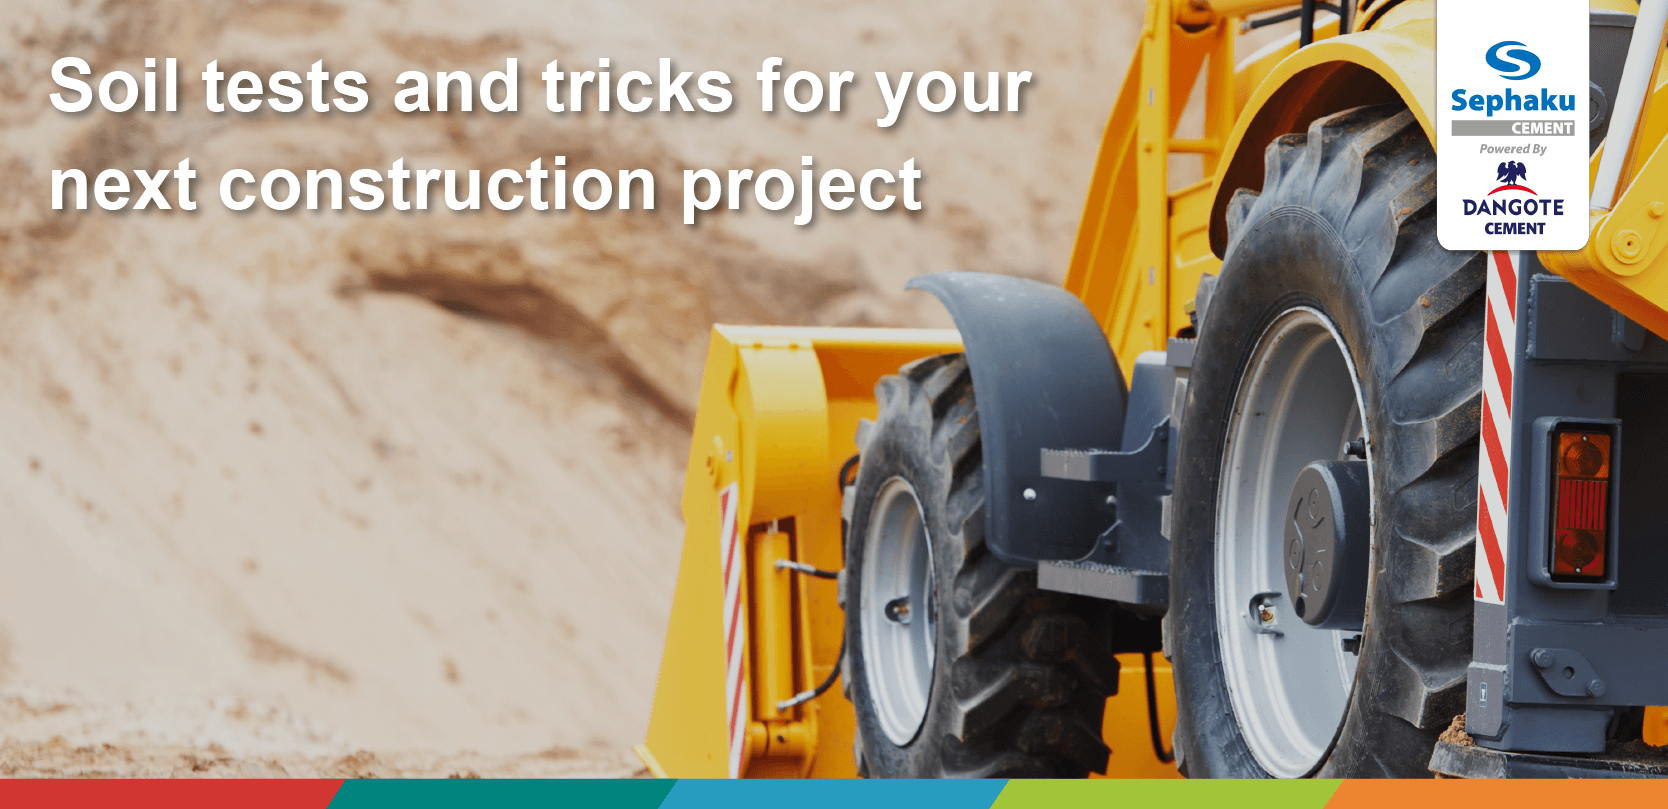 UseCase: The soil tests and tricks for your construction project - Sephaku Cement